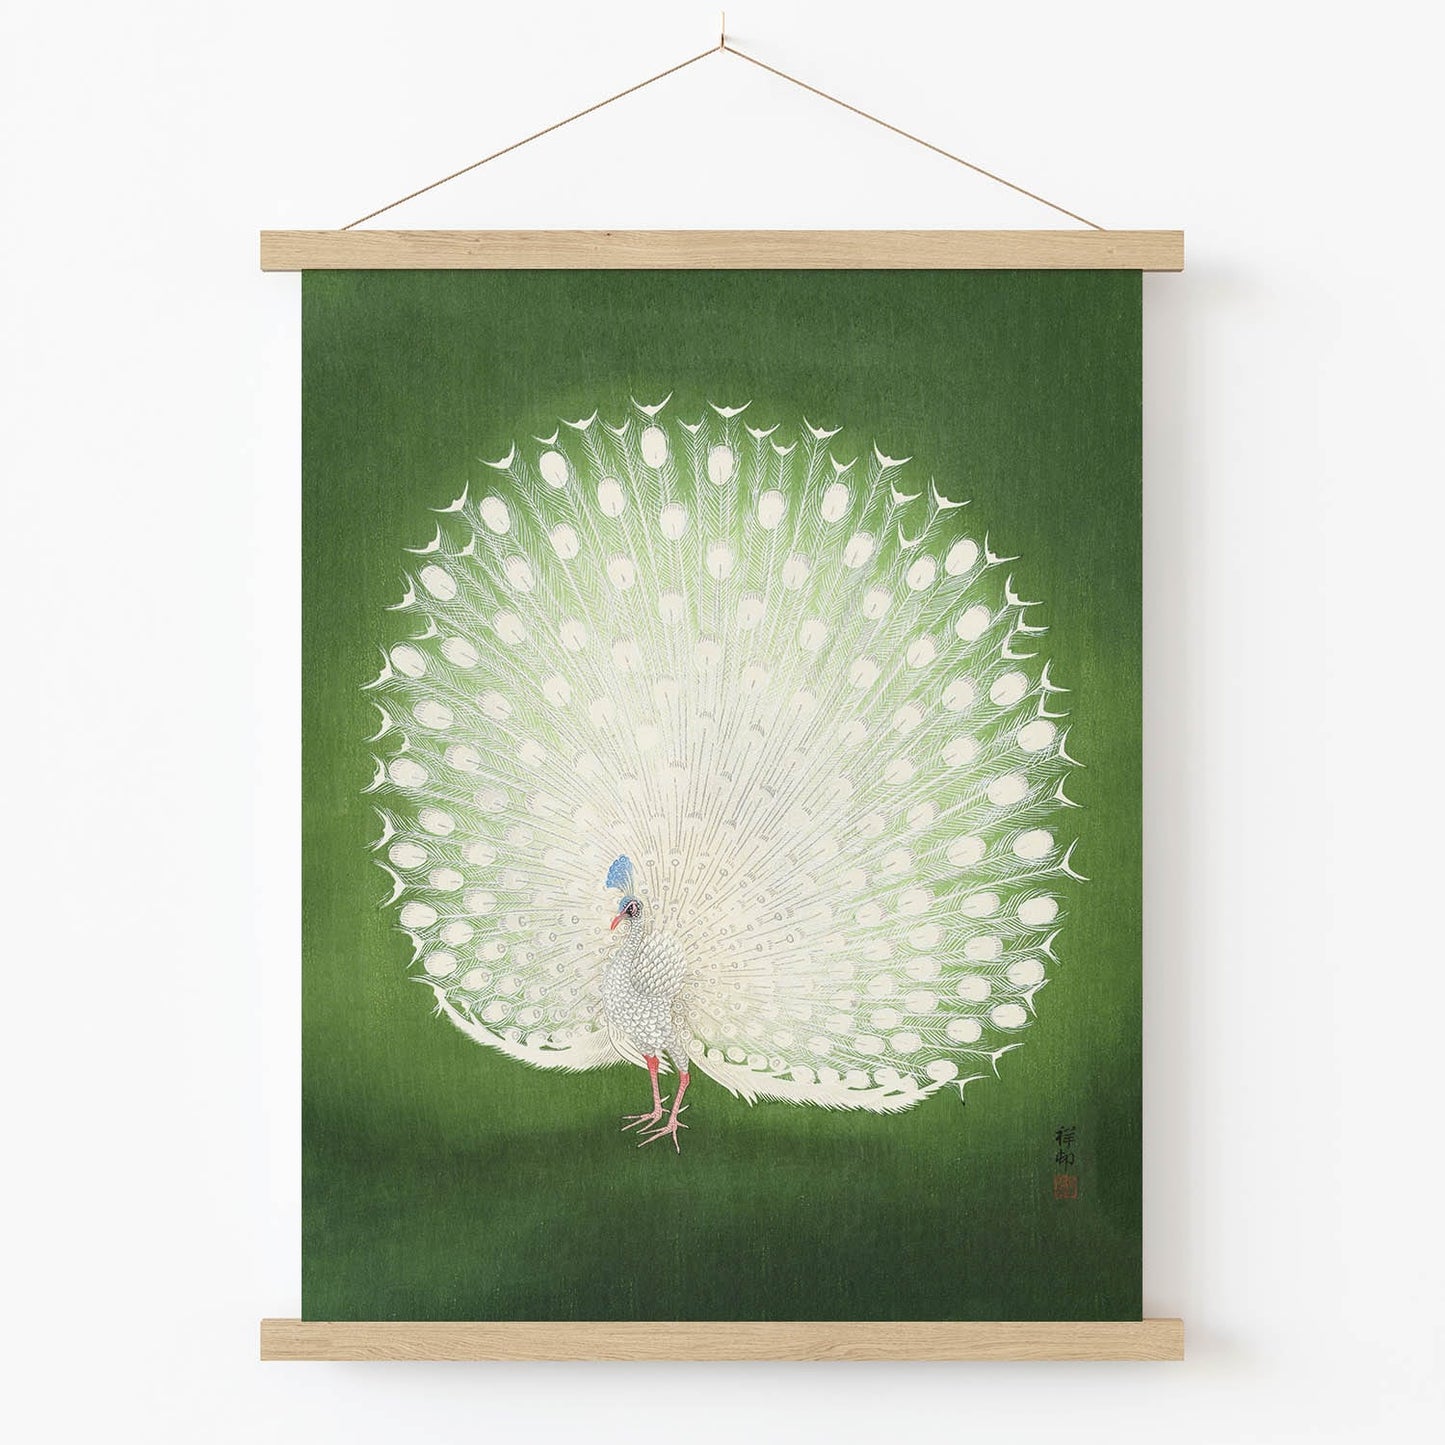 Peacock Feathers Art Print in Wood Hanger Frame on Wall